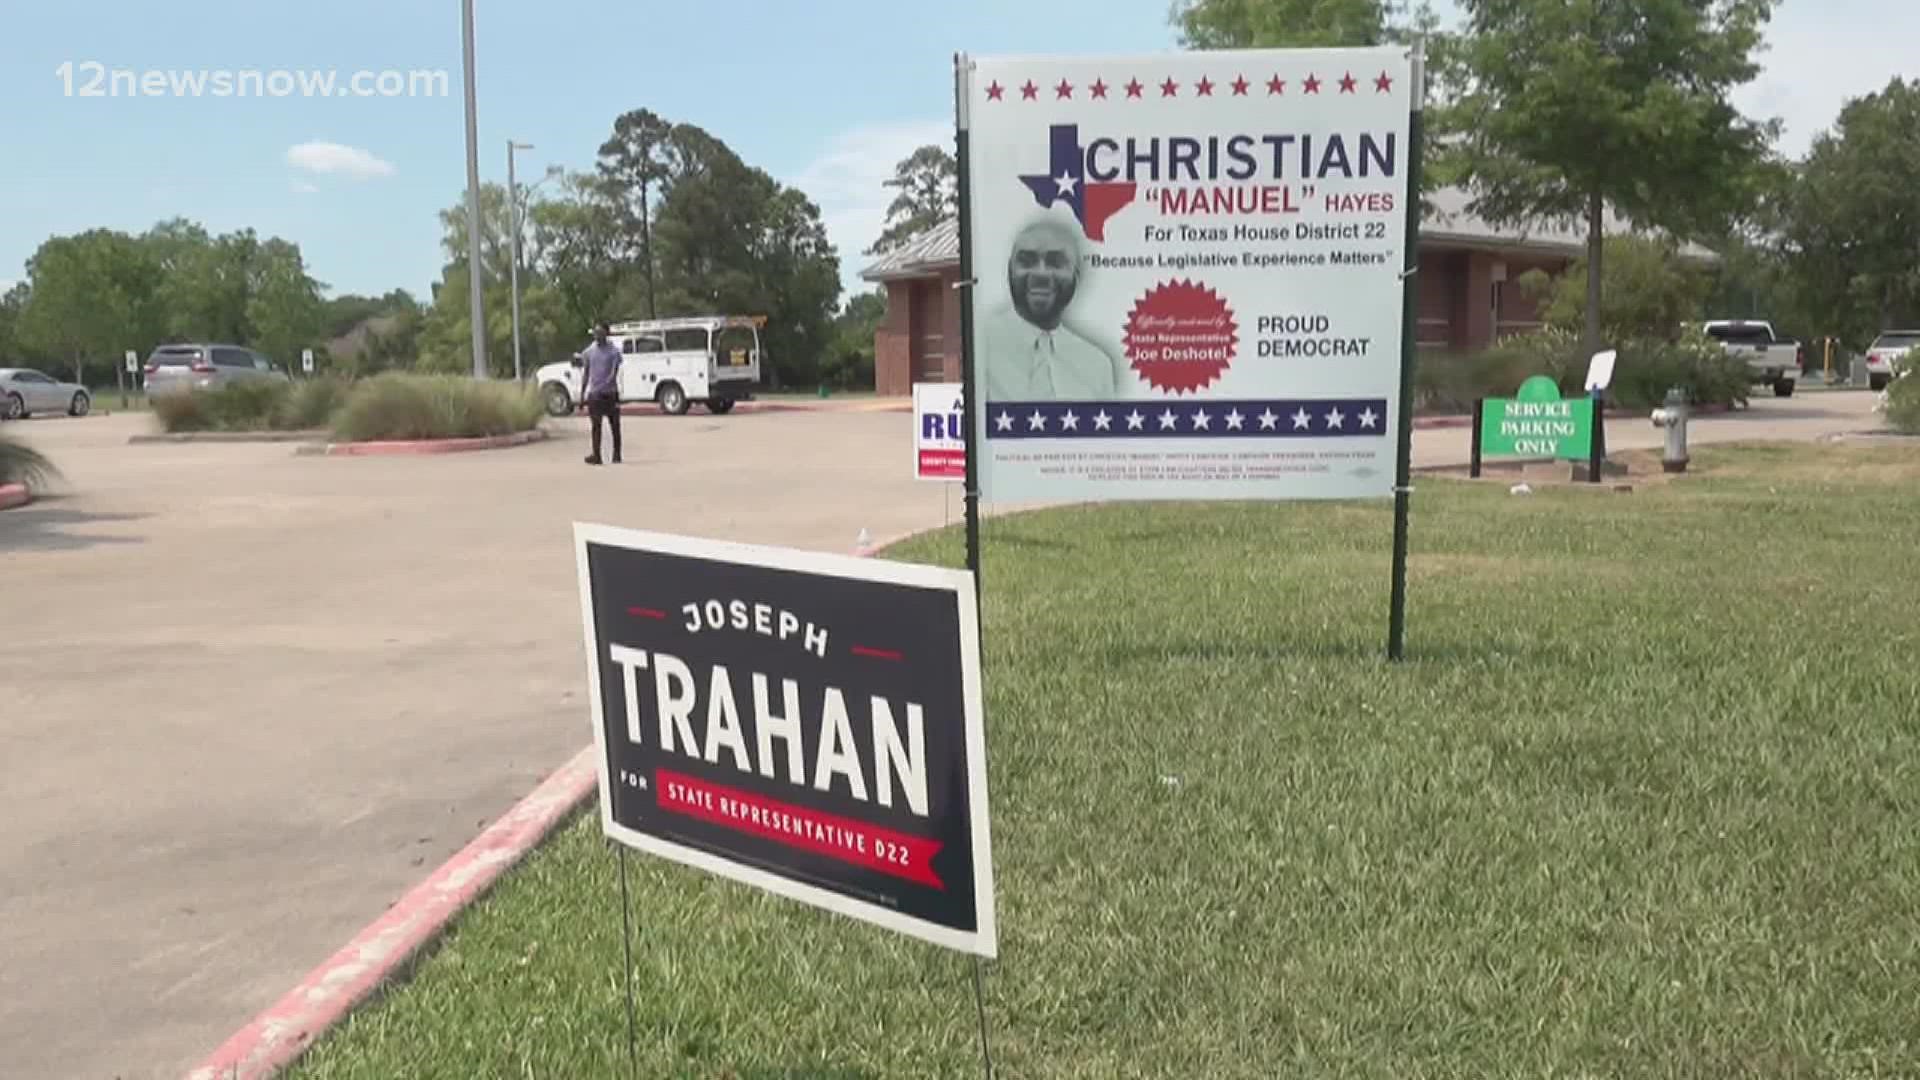 During the March elections, Trahan gained 48% of the votes and Hayes was close behind with 43%.